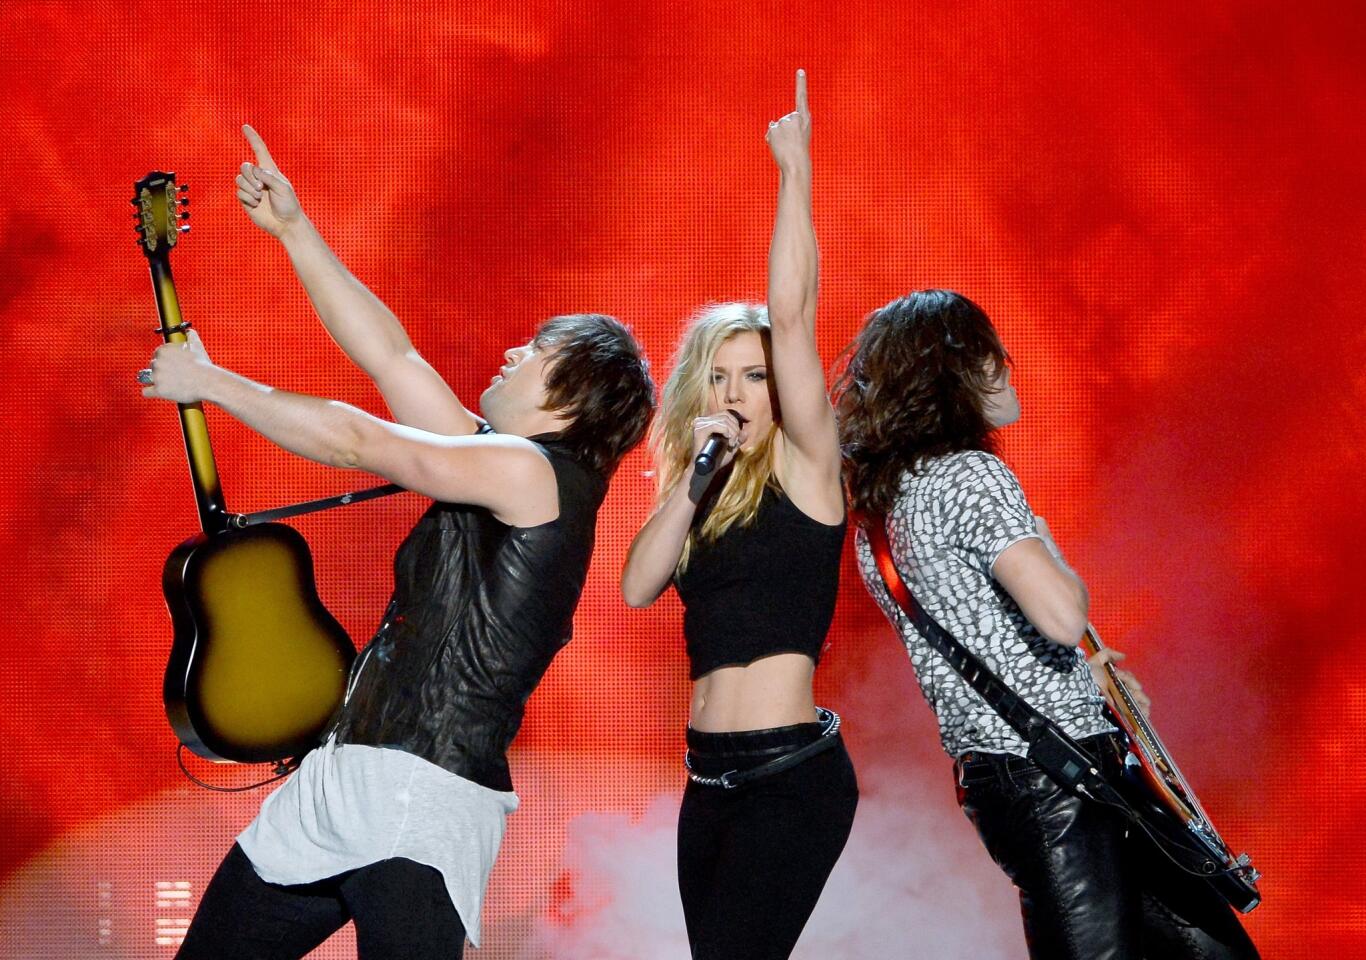 Musicians Neil Perry, left, Kimberly Perry and Reid Perry of the Band Perry perform during the 49th Academy of Country Music Awards at the MGM Grand Garden Arena in Las Vegas on Sunday night.